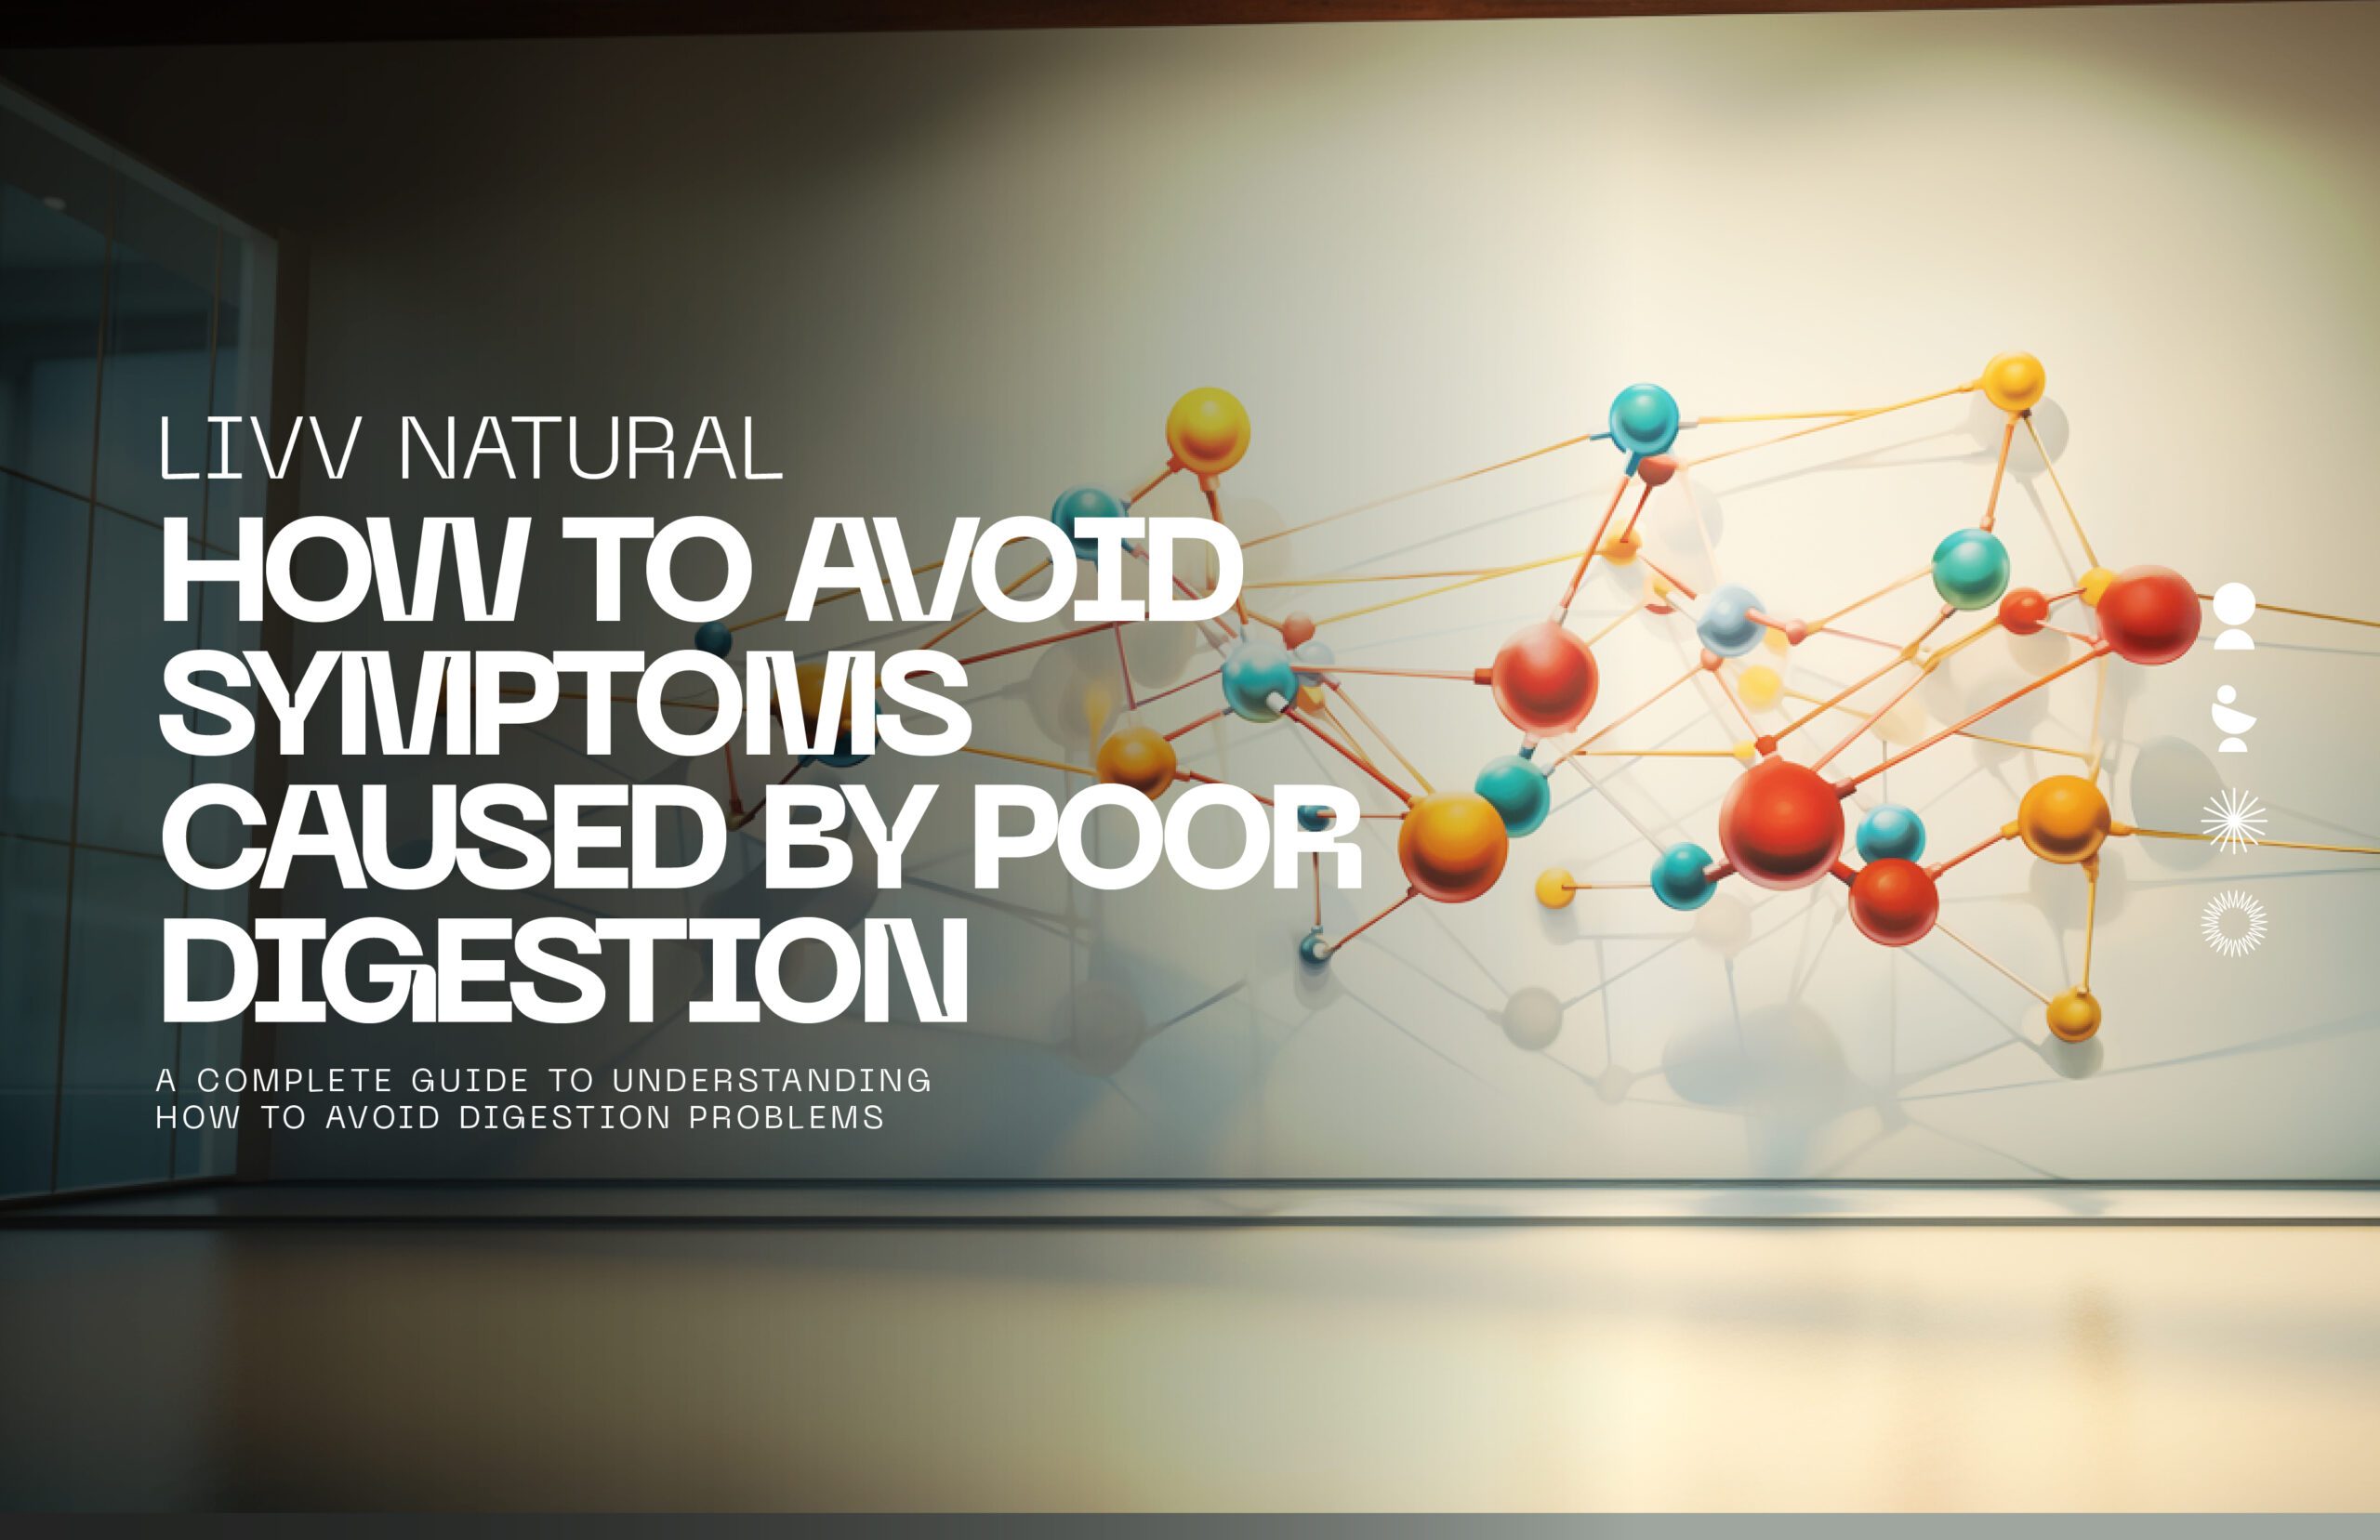 How your poor digestion is leading to increased symptoms!